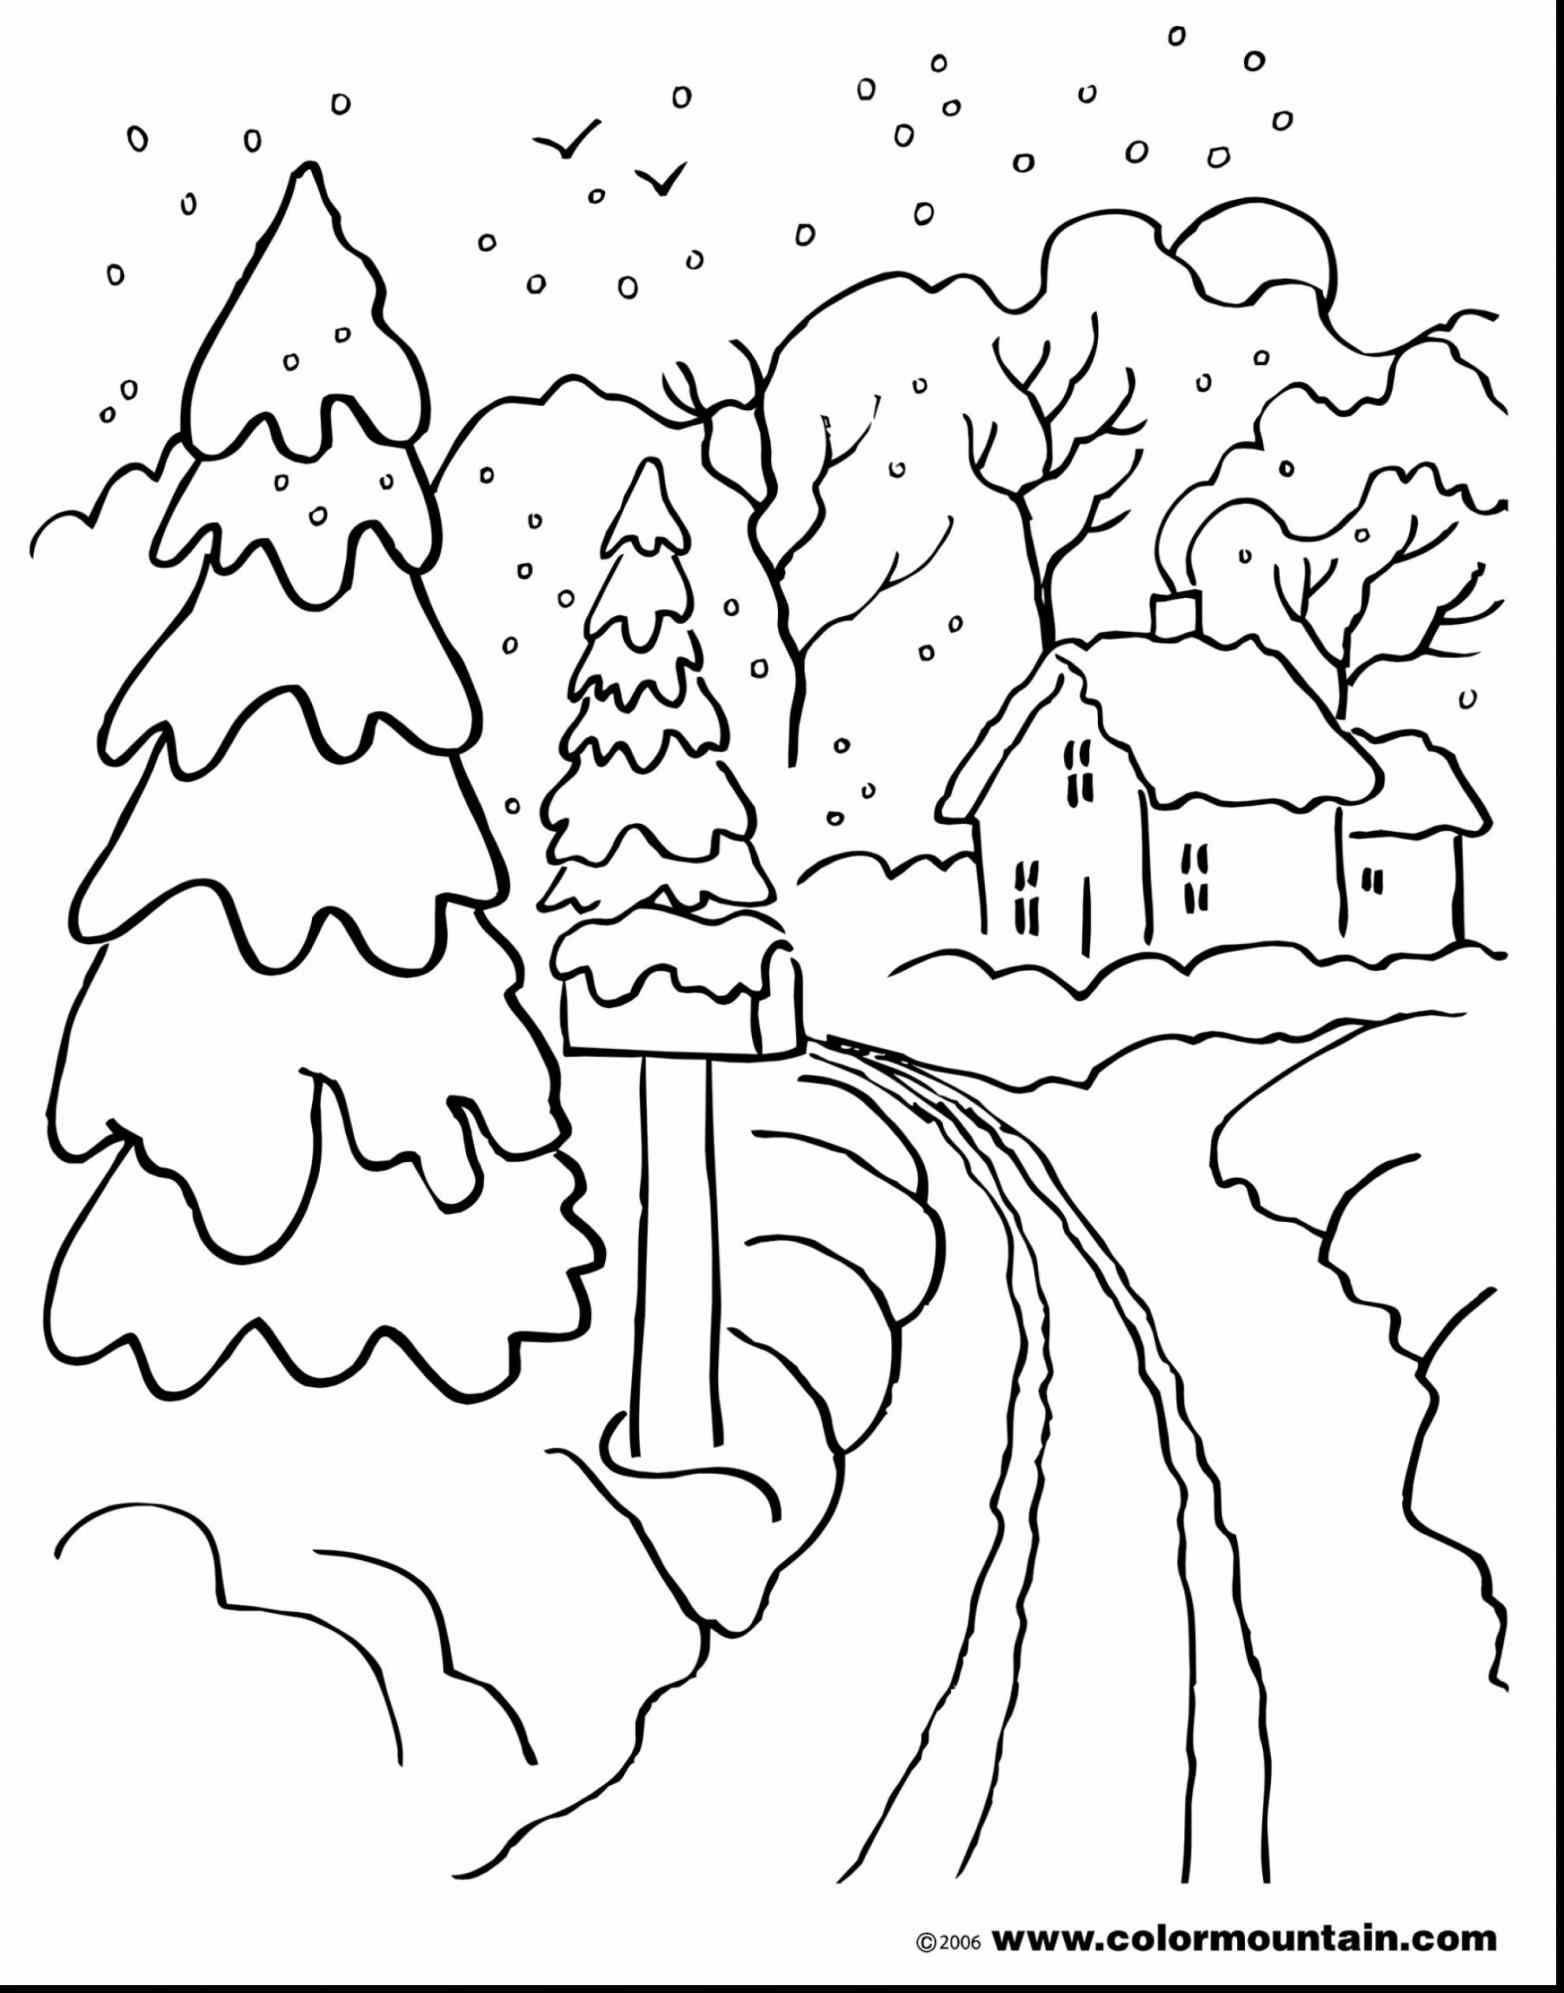 free-coloring-pages-landscapes-printables-at-getcolorings-free-printable-colorings-pages